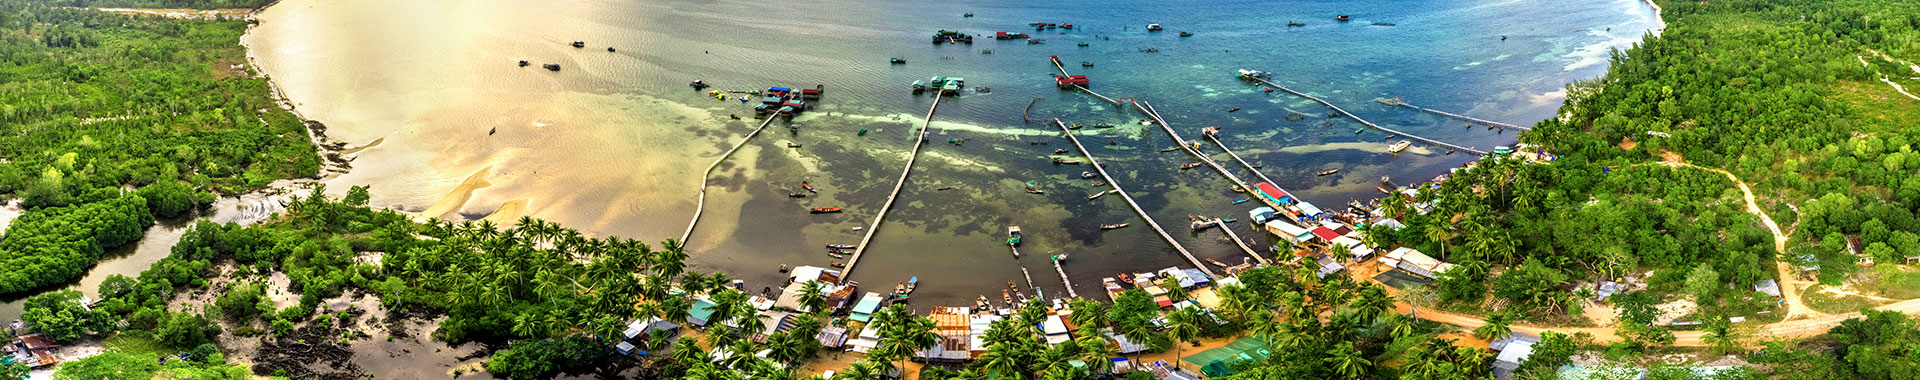 Kien Giang Tours - Top Attractions in Kien Giang & Things to do